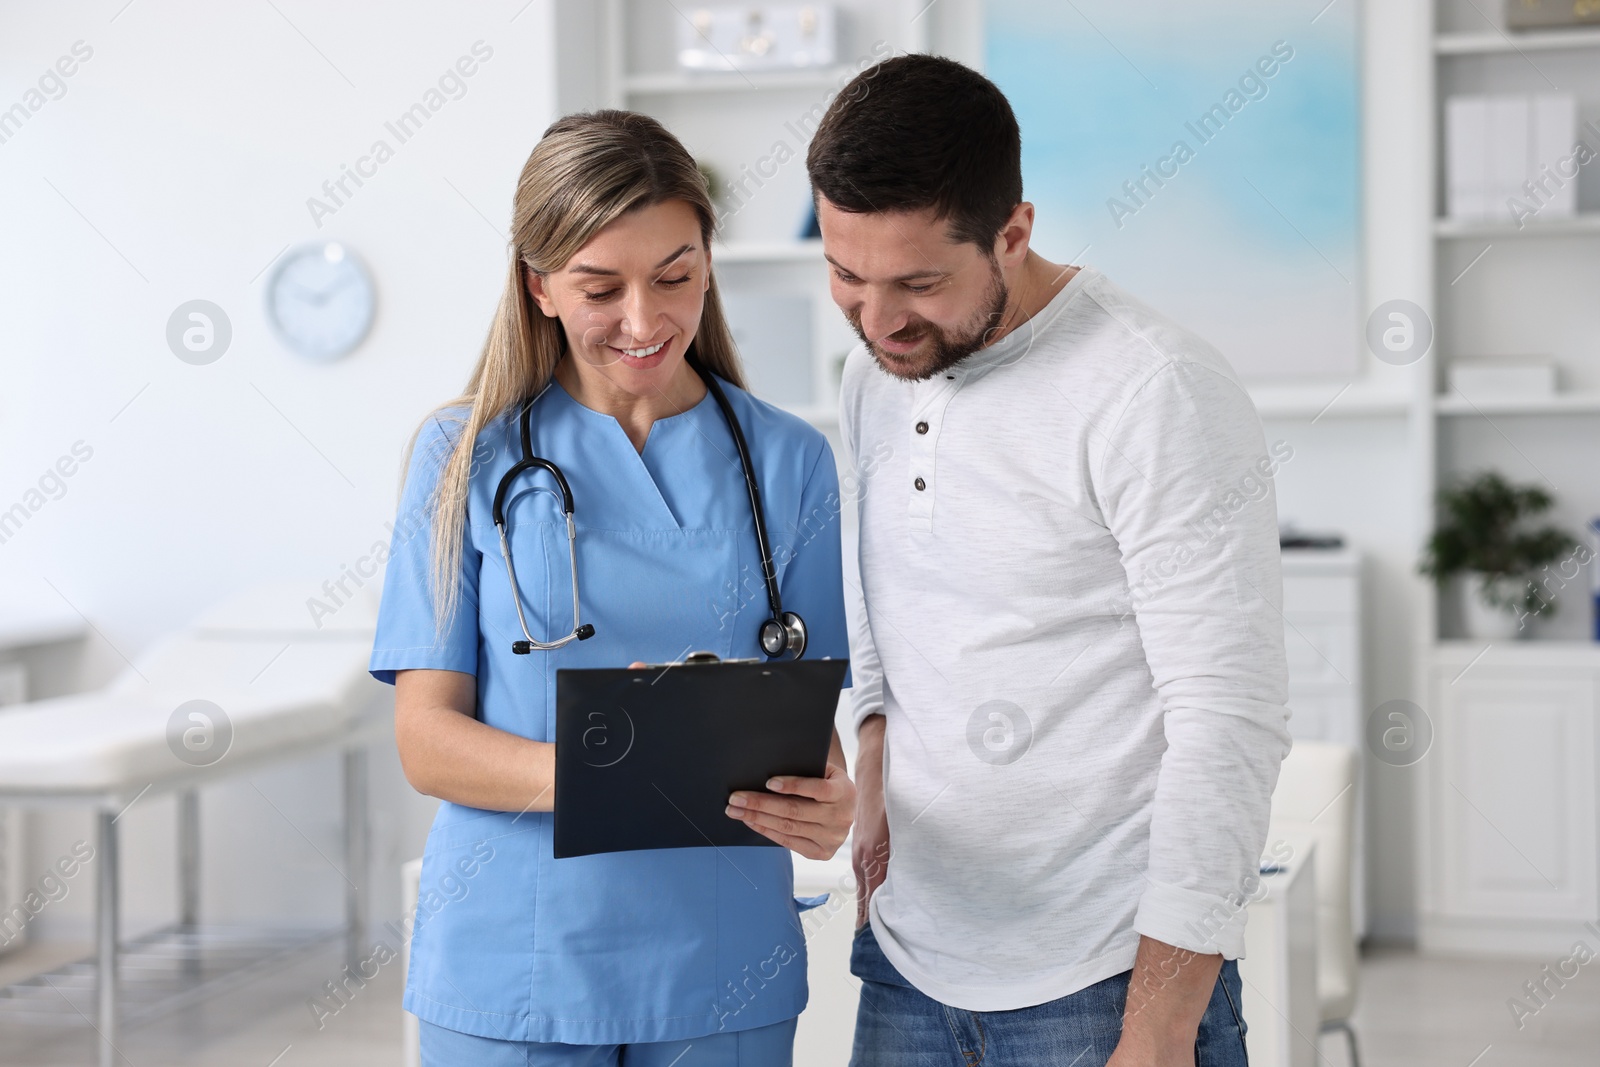 Photo of Professional doctor working with patient in hospital